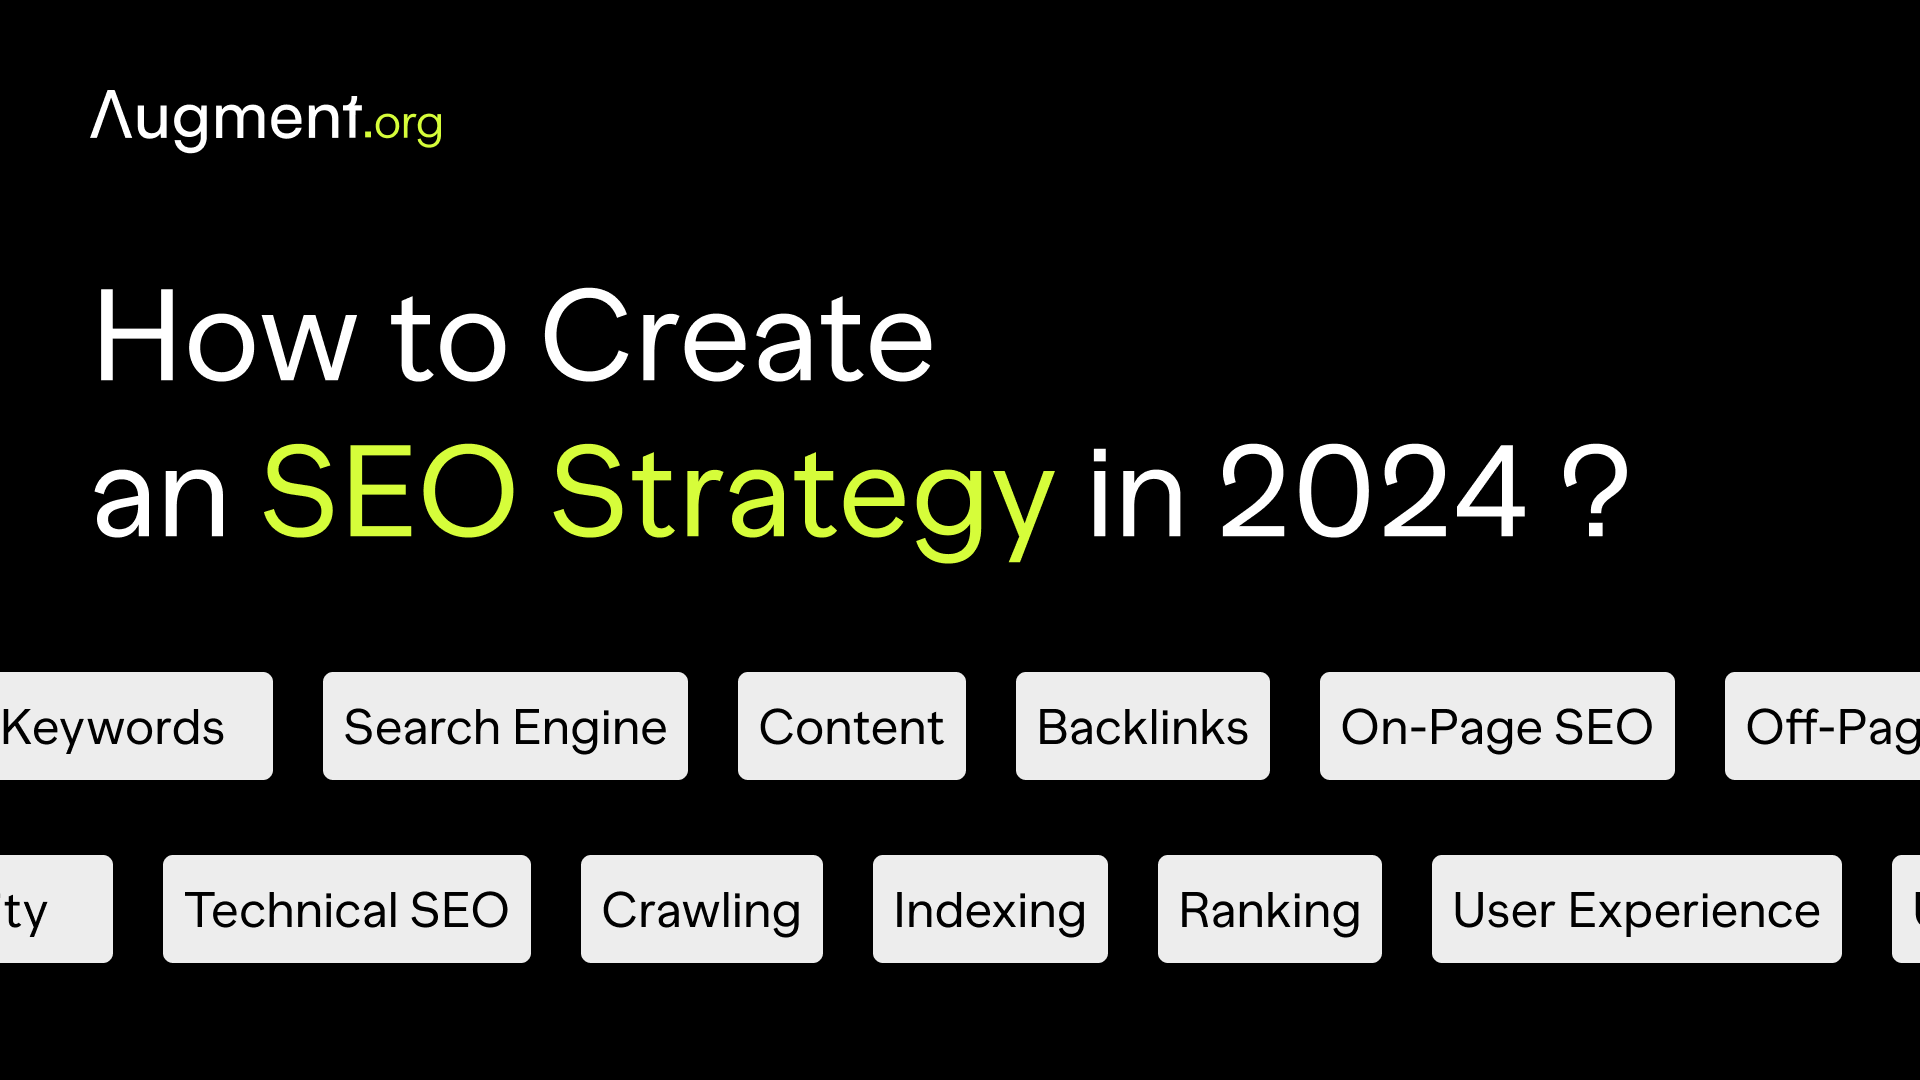 SEO Content Strategy: How to Create an SEO Strategy for 2024